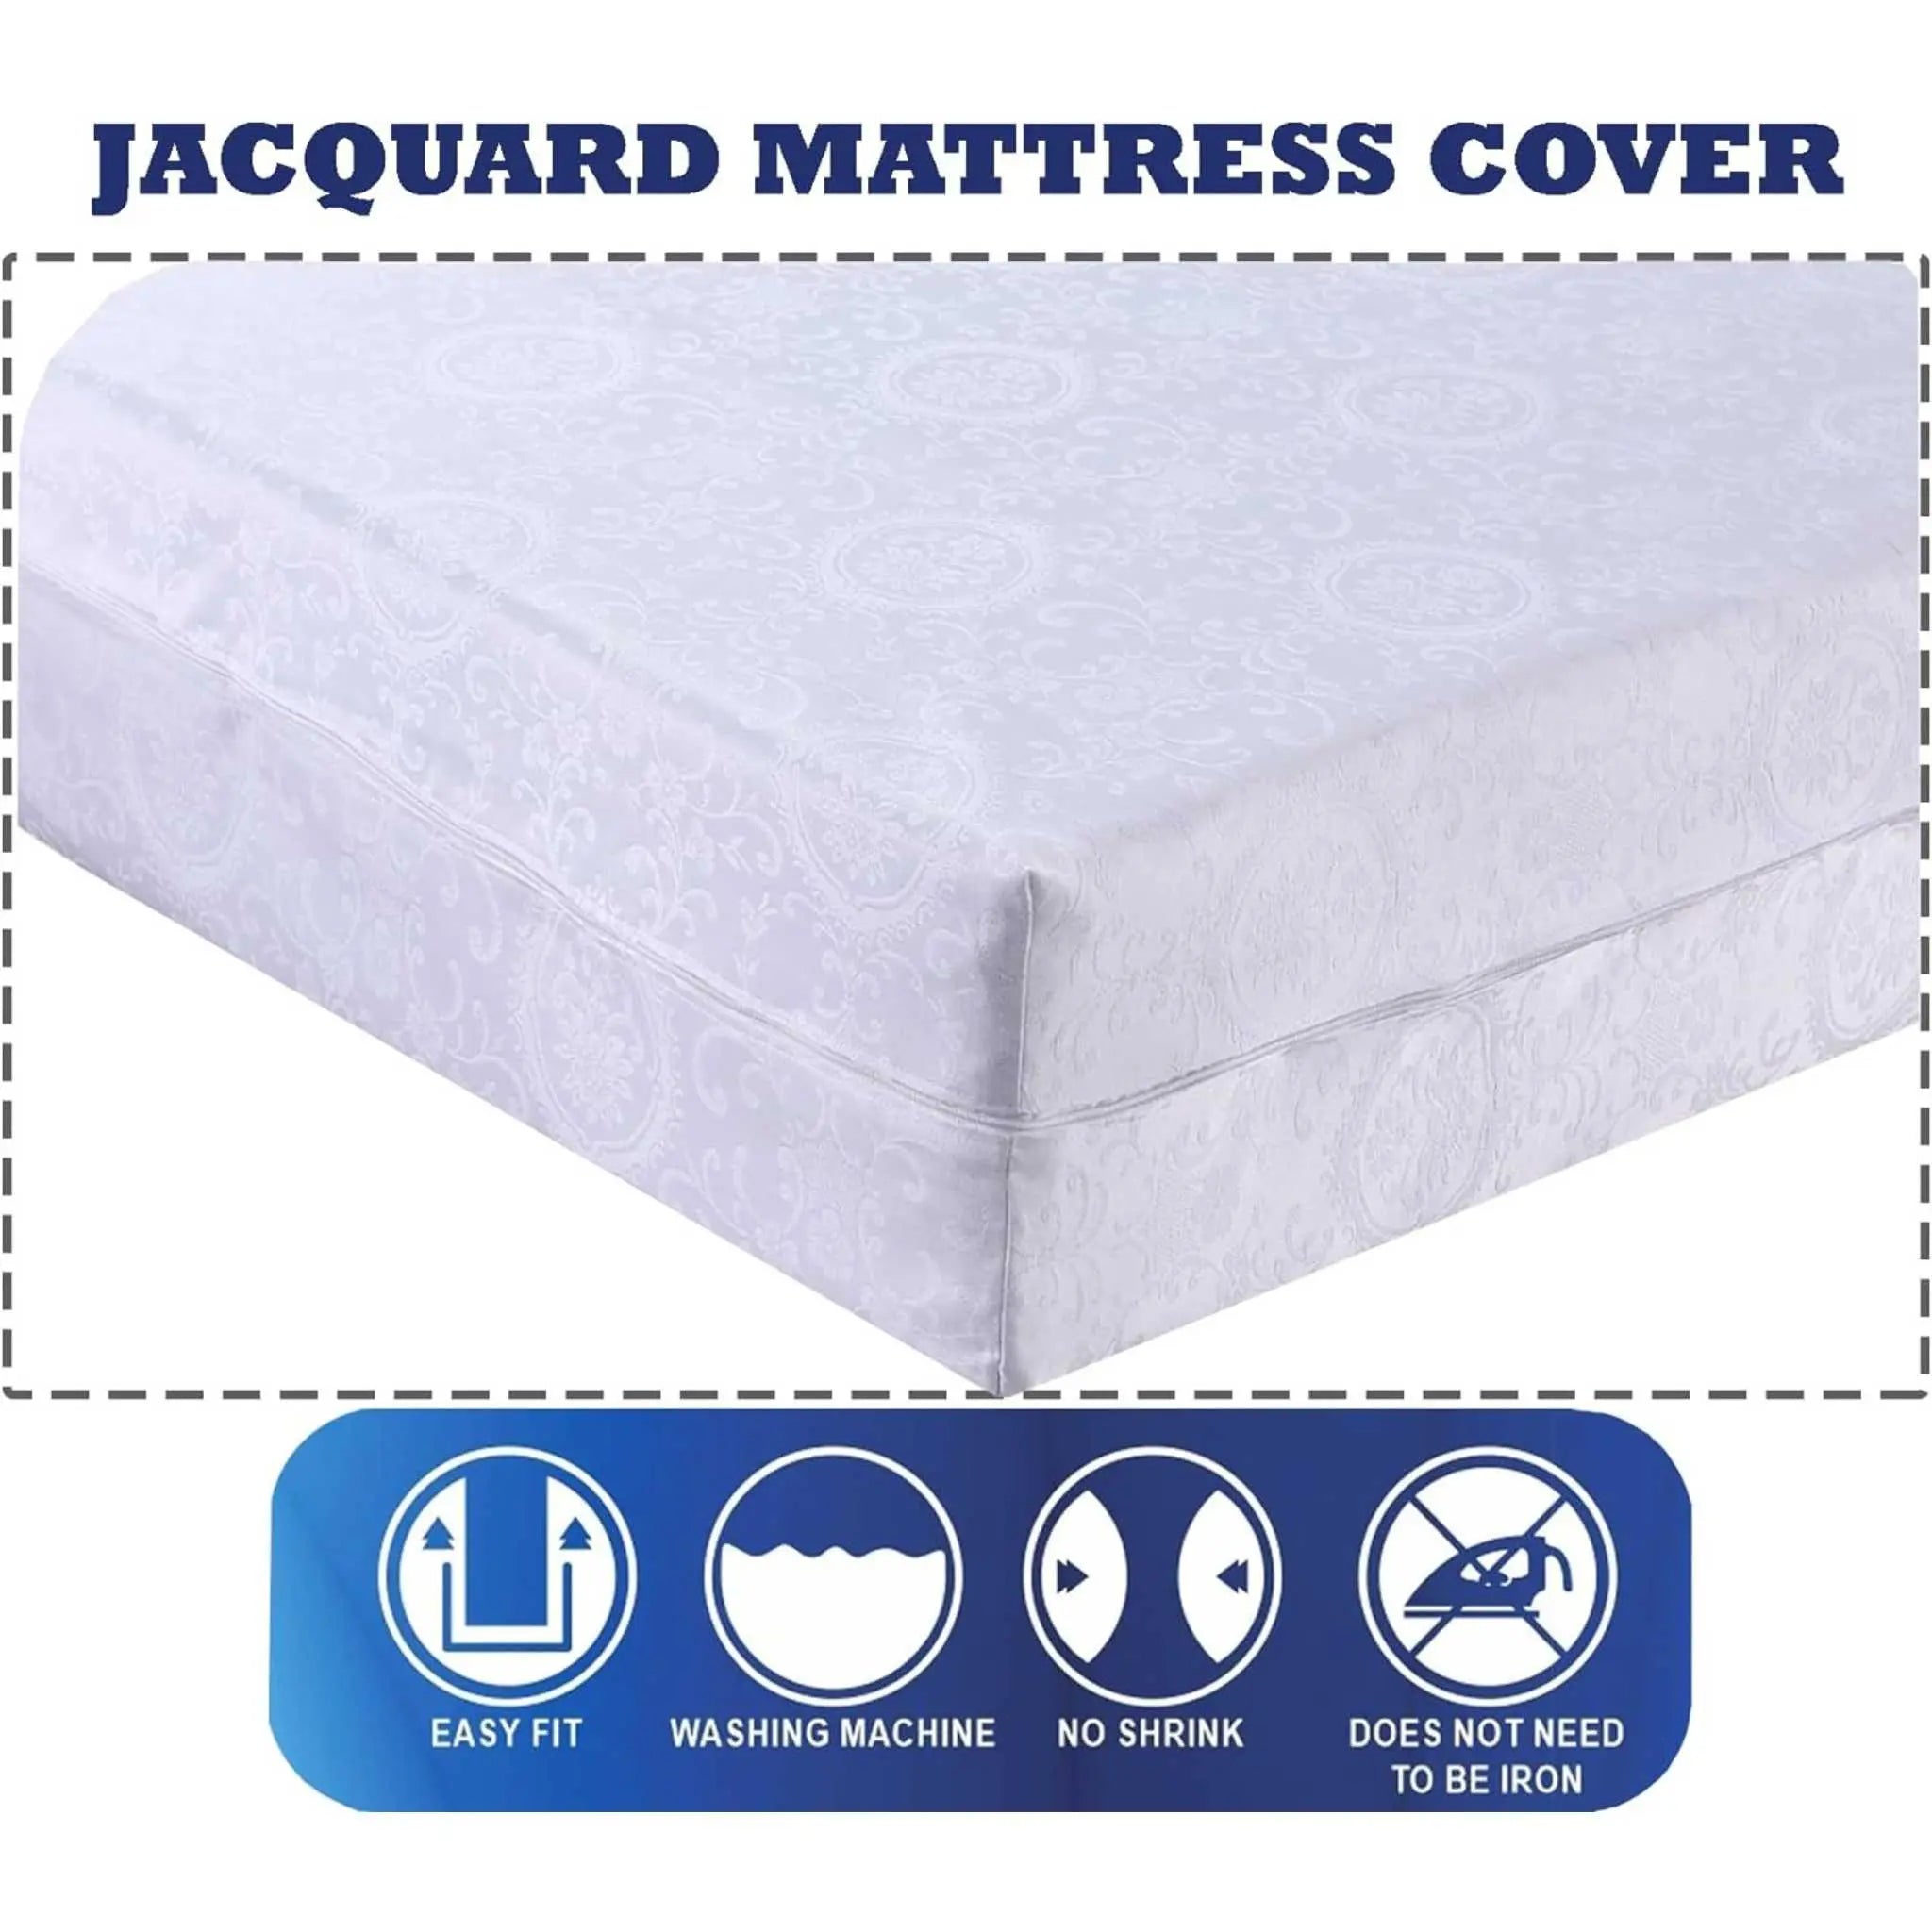 White Floral Jacquard Mattress Protector, Full Zipper Closure Cover, 360° Fully Fitted Encasement, Anti Allergy, Breathable, Anti Bed Bug & Dust Mite, Easy Care, Machine Washable (Super King) - Beach Stone